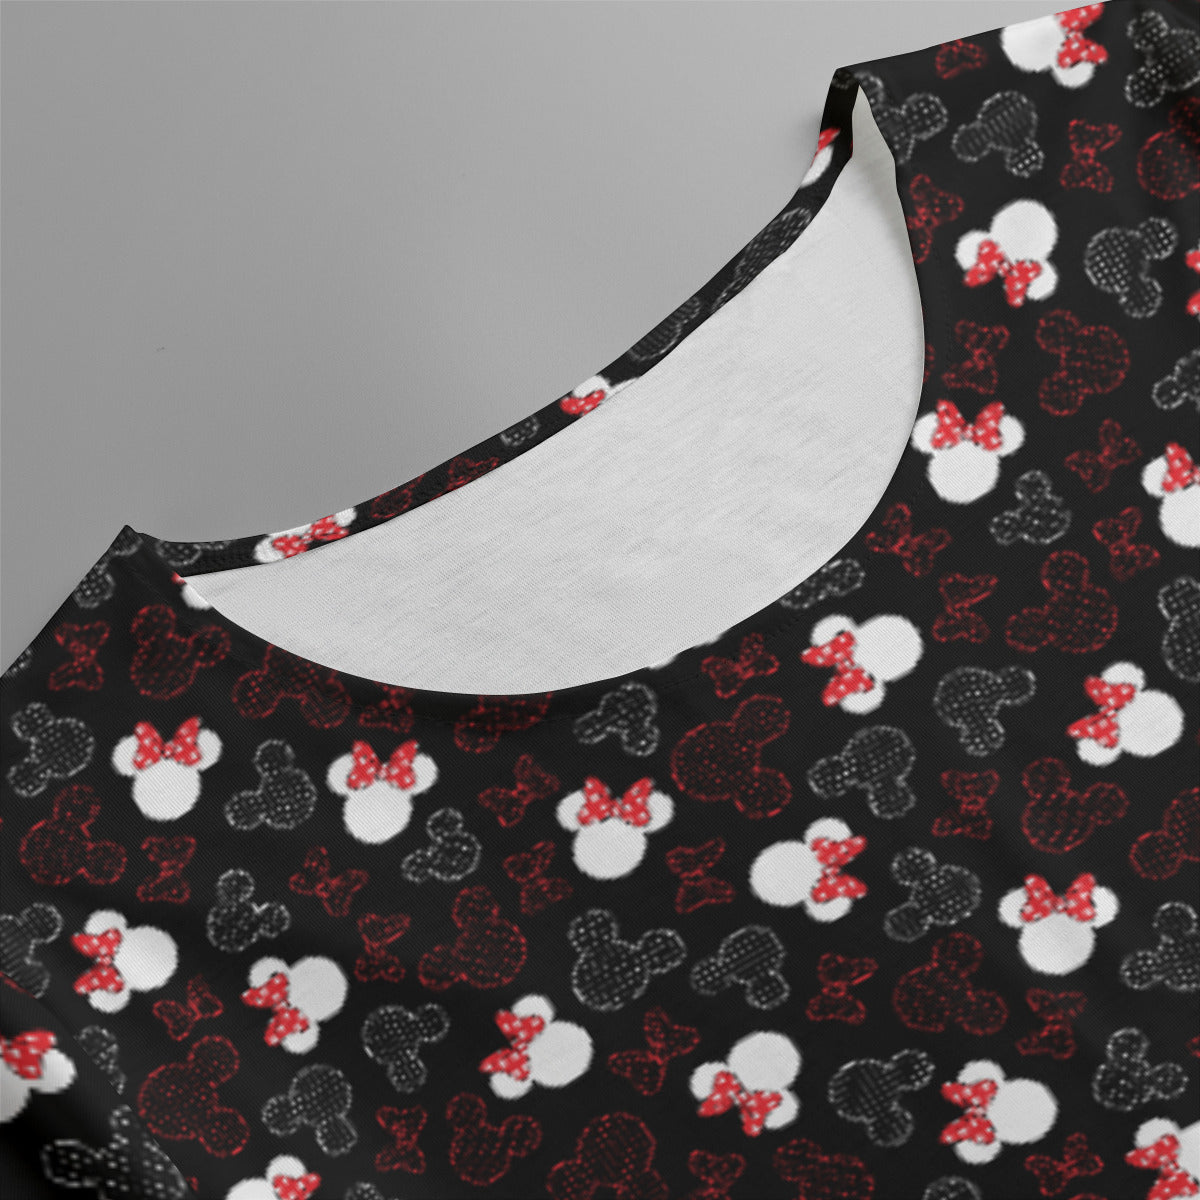 Mickey And Minnie Dots Women's Swing Dress With Short Sleeve